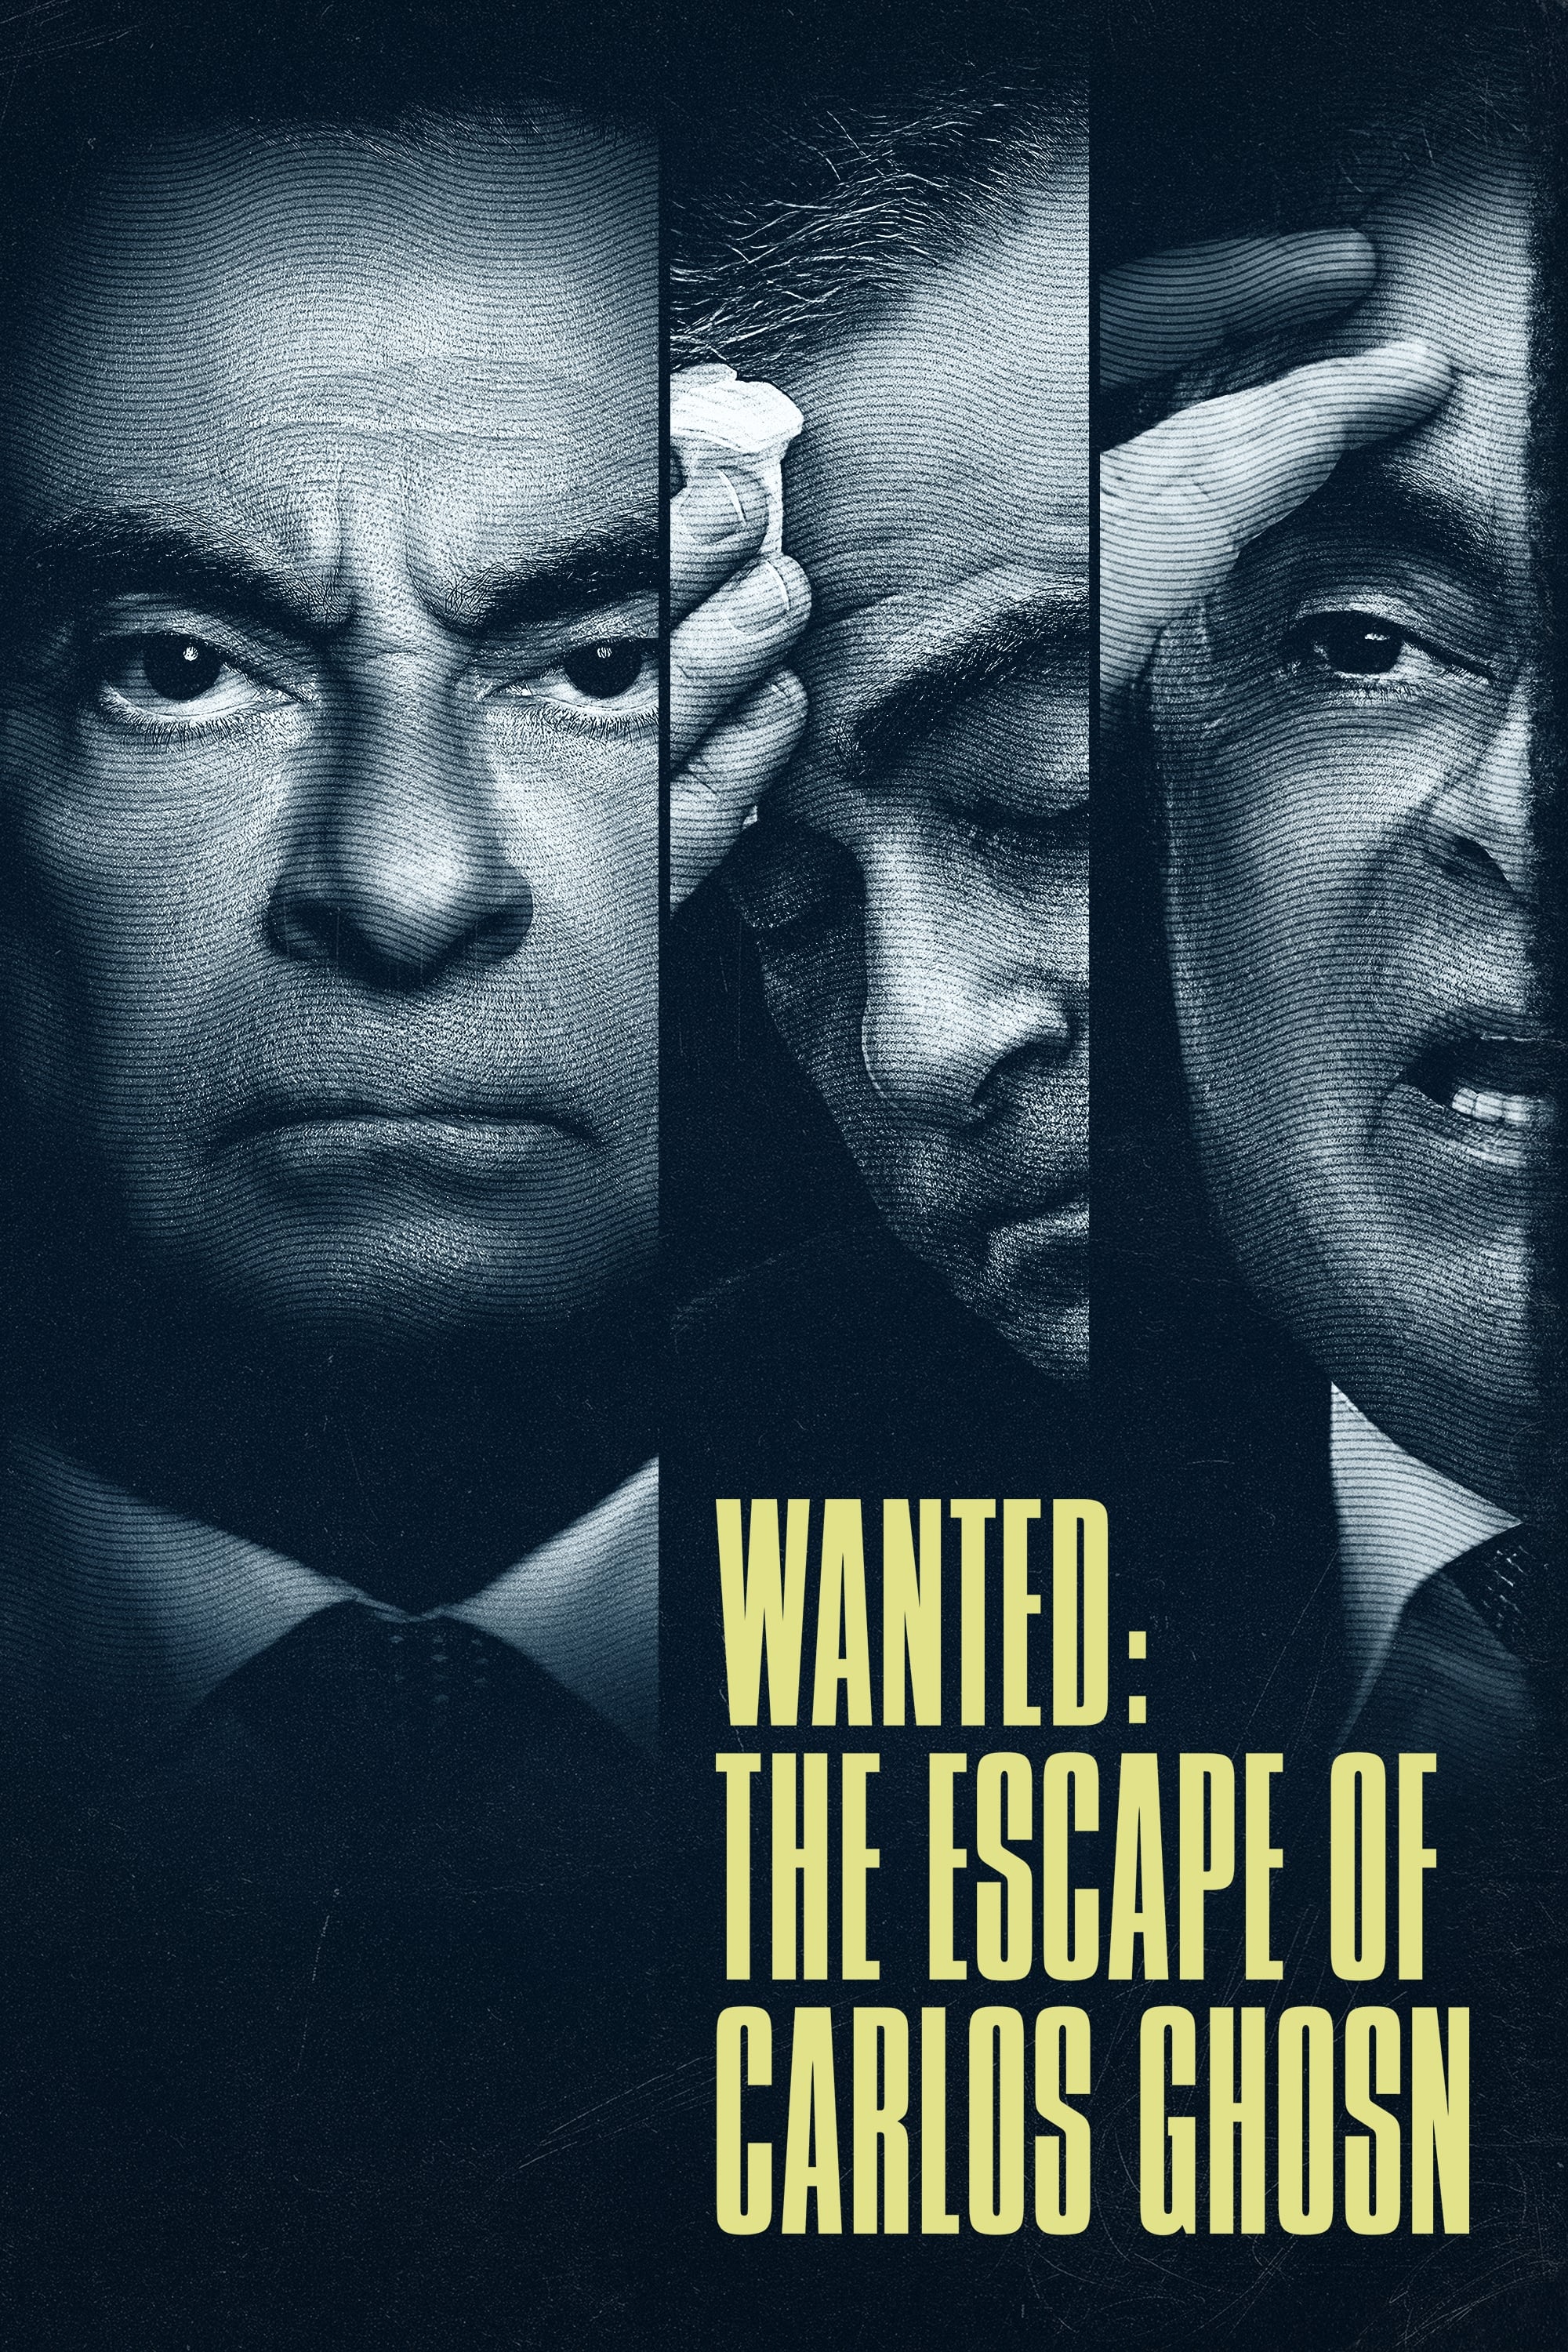 Wanted: The Escape of Carlos Ghosn TV Shows About True Crime